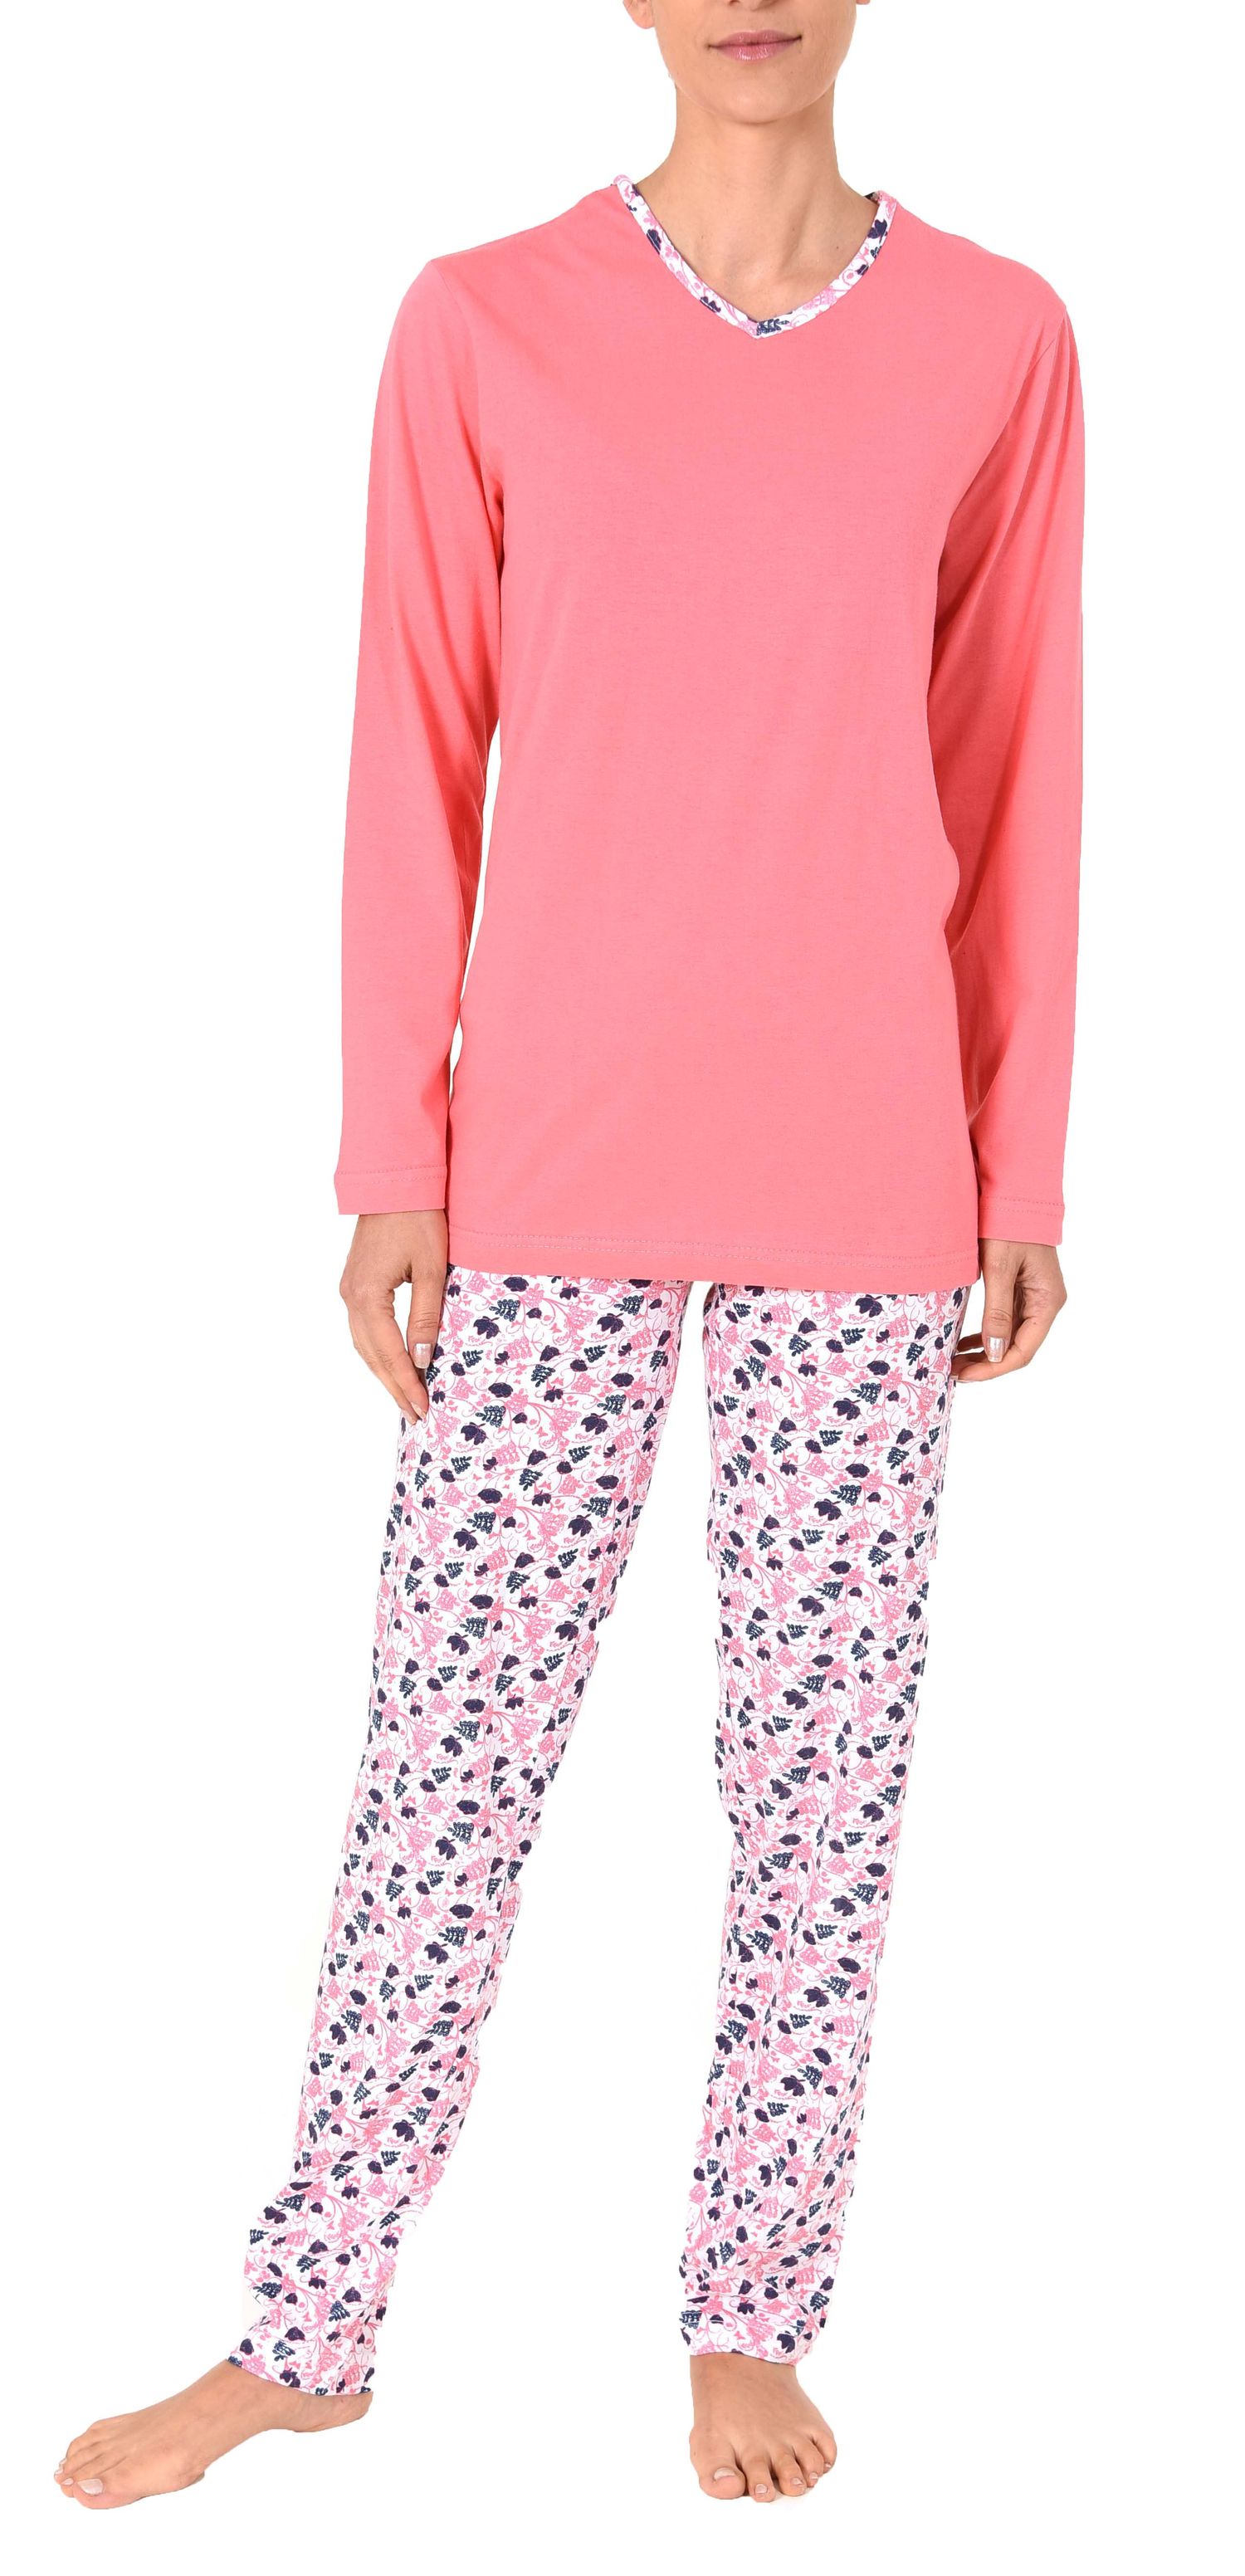 Women's long-sleeved pajamas in a floral designs,Prints also in plus sizes